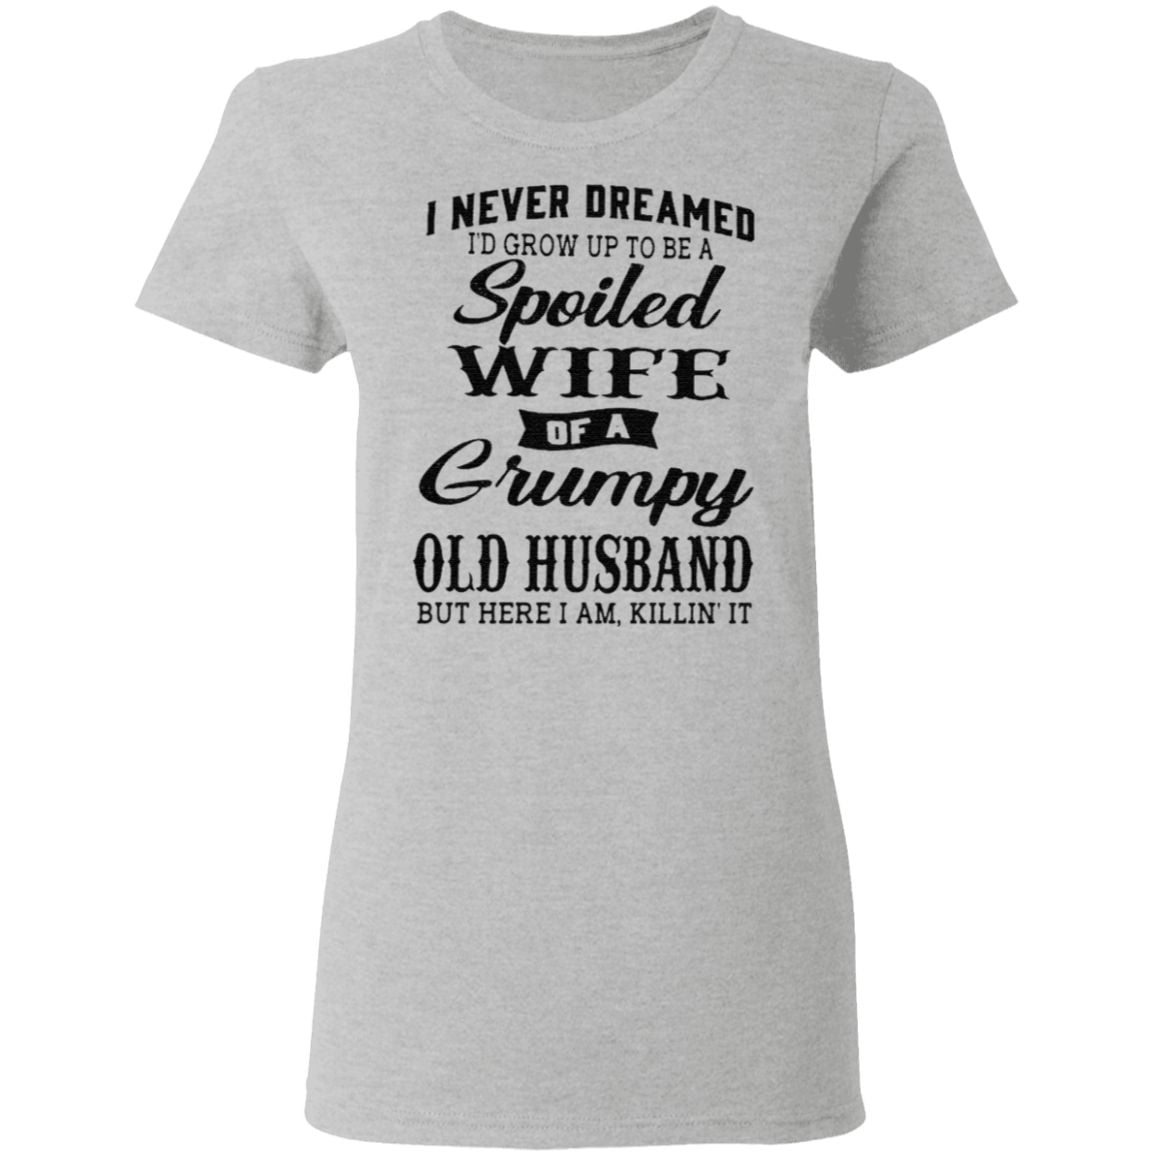 I Never Dreamed I’d Grow Up To Be A Spoiled Wife Of A Grumpy Old Husband But Here I Am Killin It TShirt